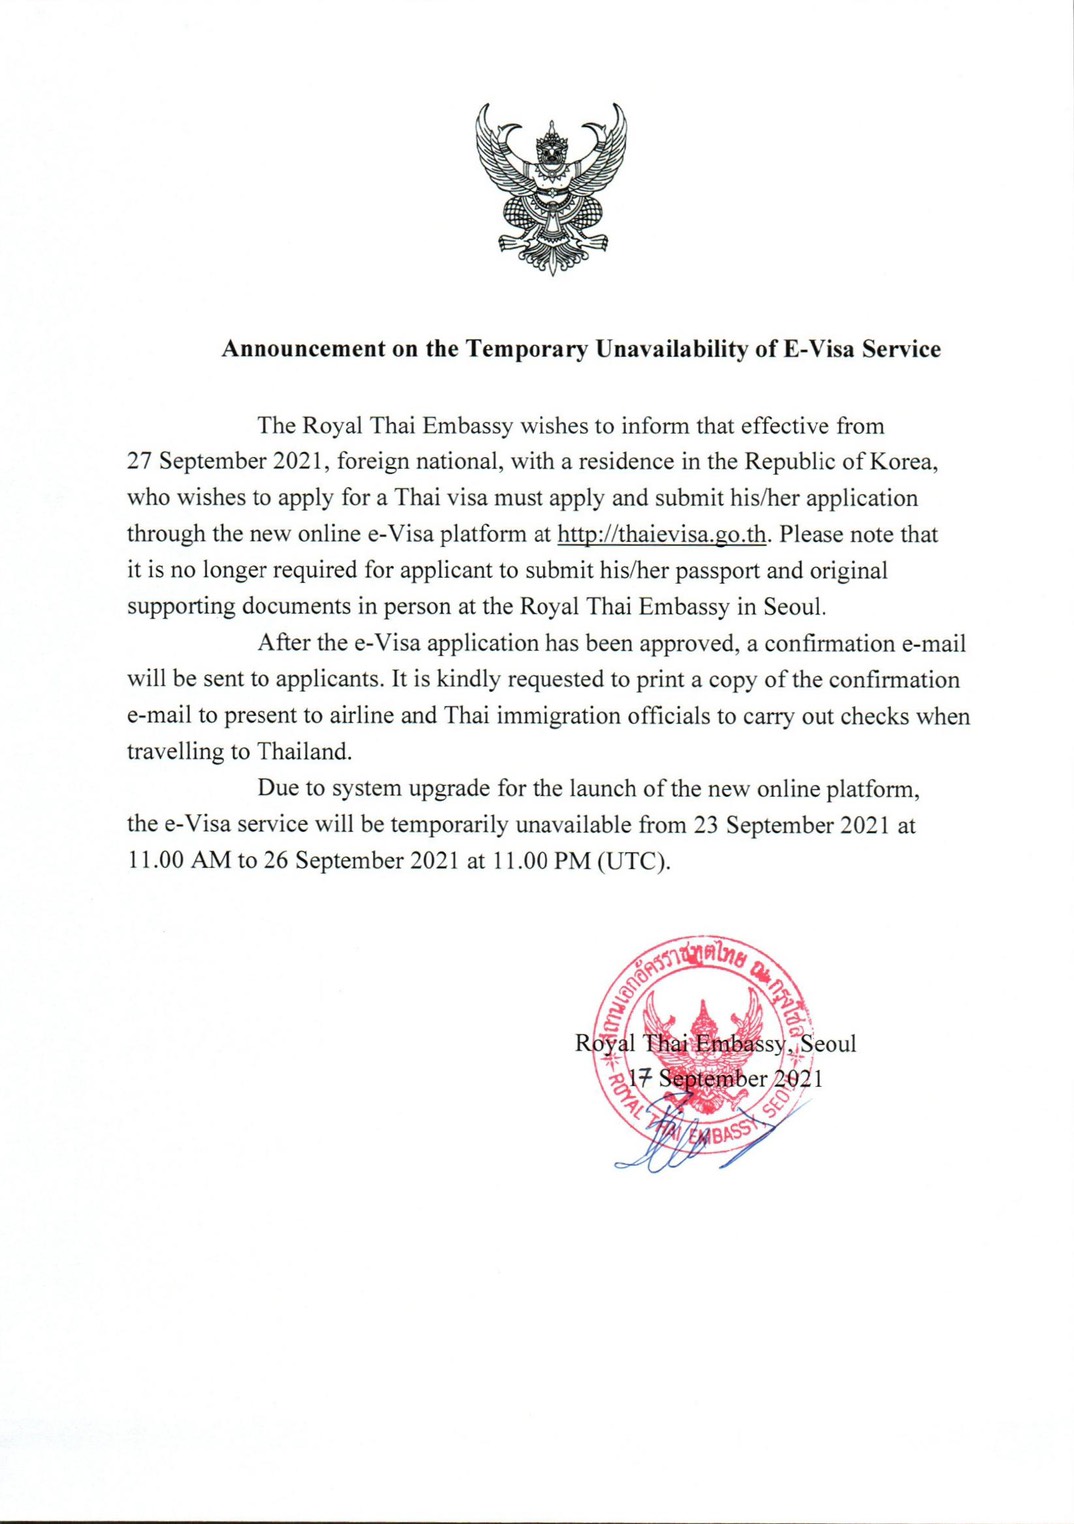 Announcement_on_the_Temporary_Unavailability_of_E-visa_Service